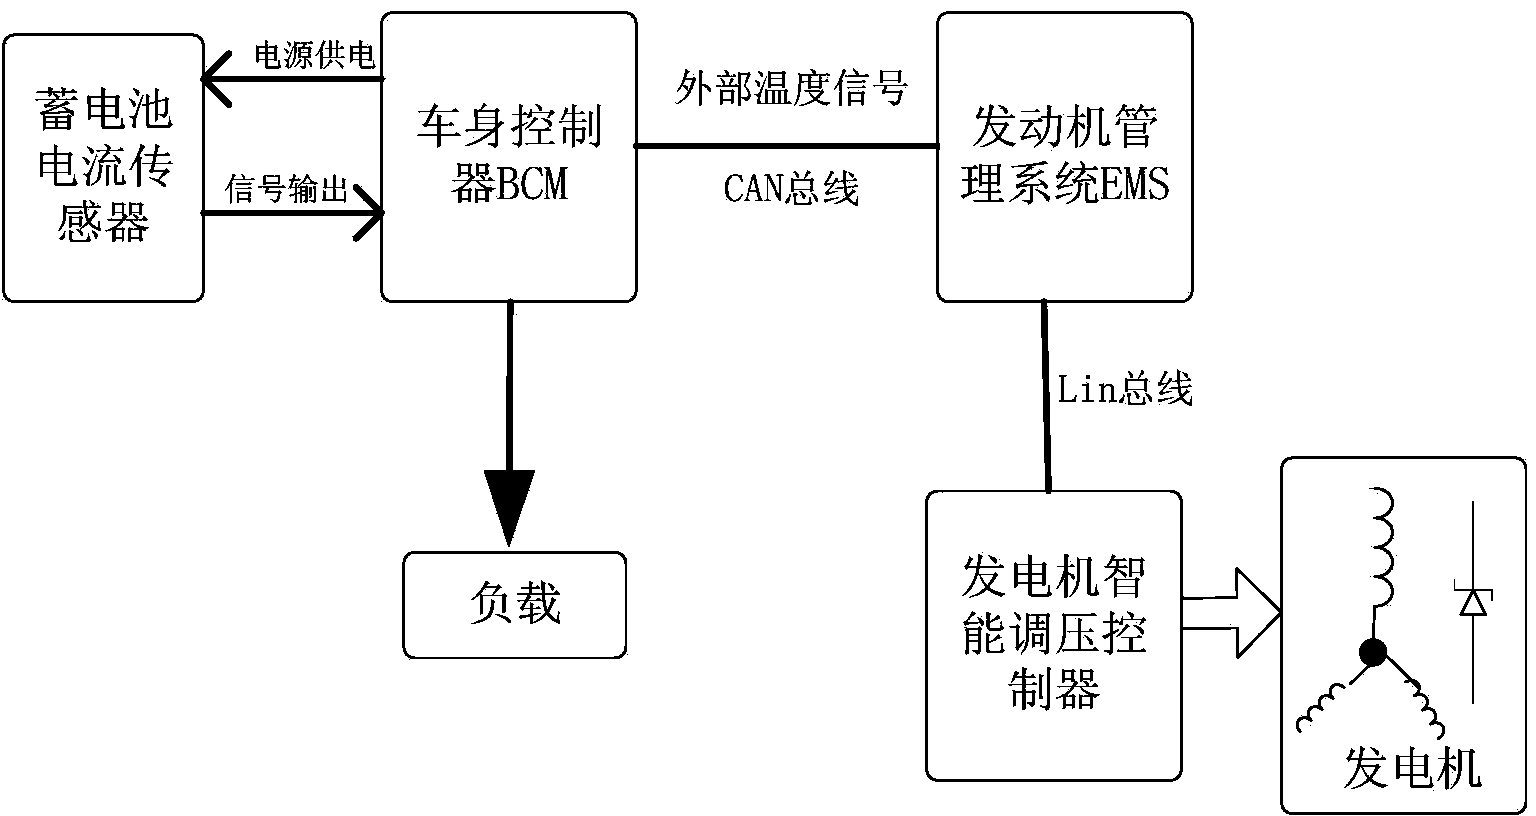 Automobile power supply control system